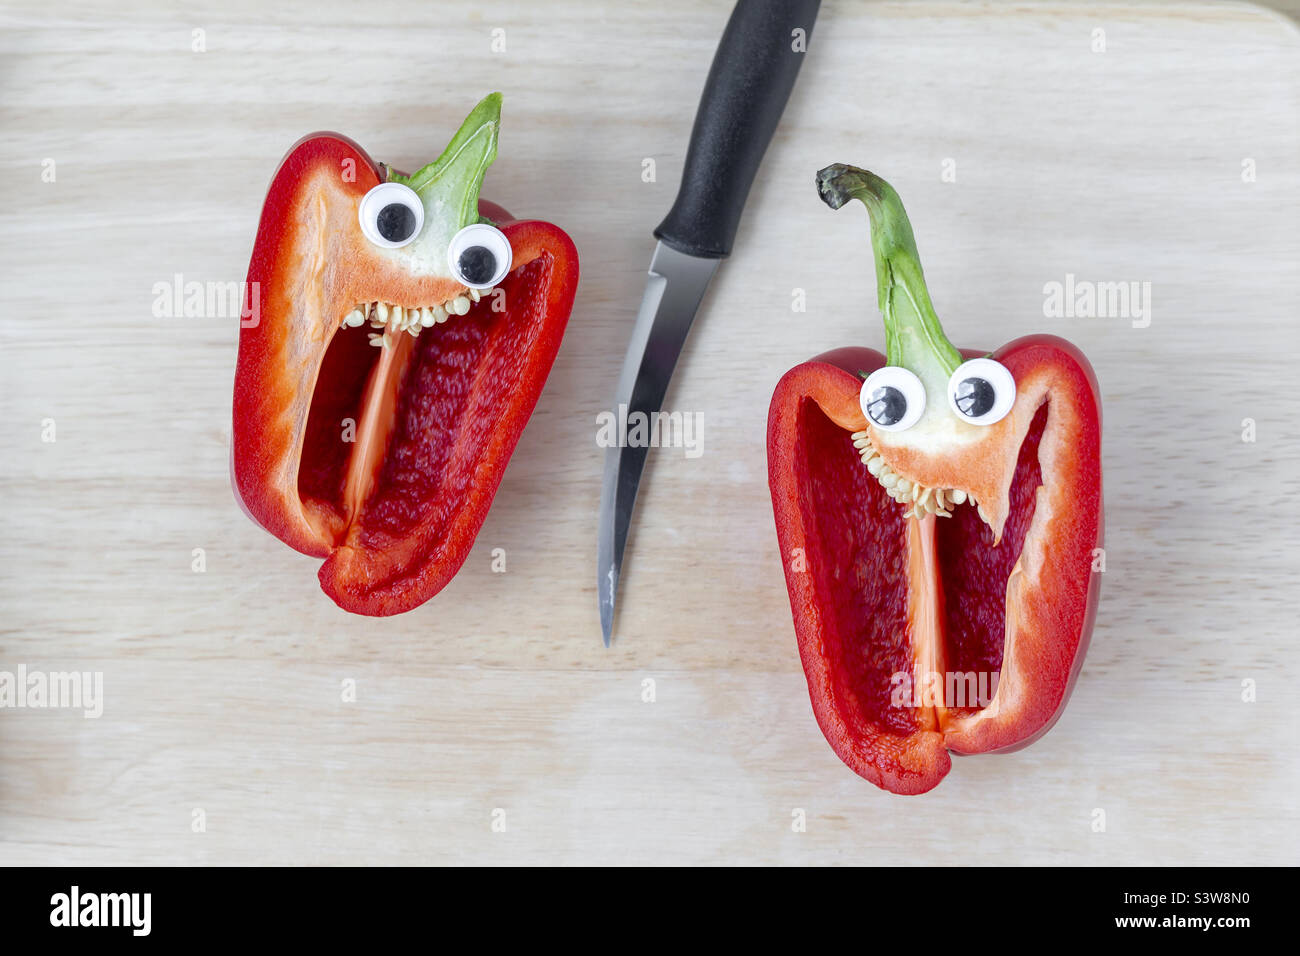 Sweet pepper cut in half with knife in the middle of the frame, googly eyes Stock Photo